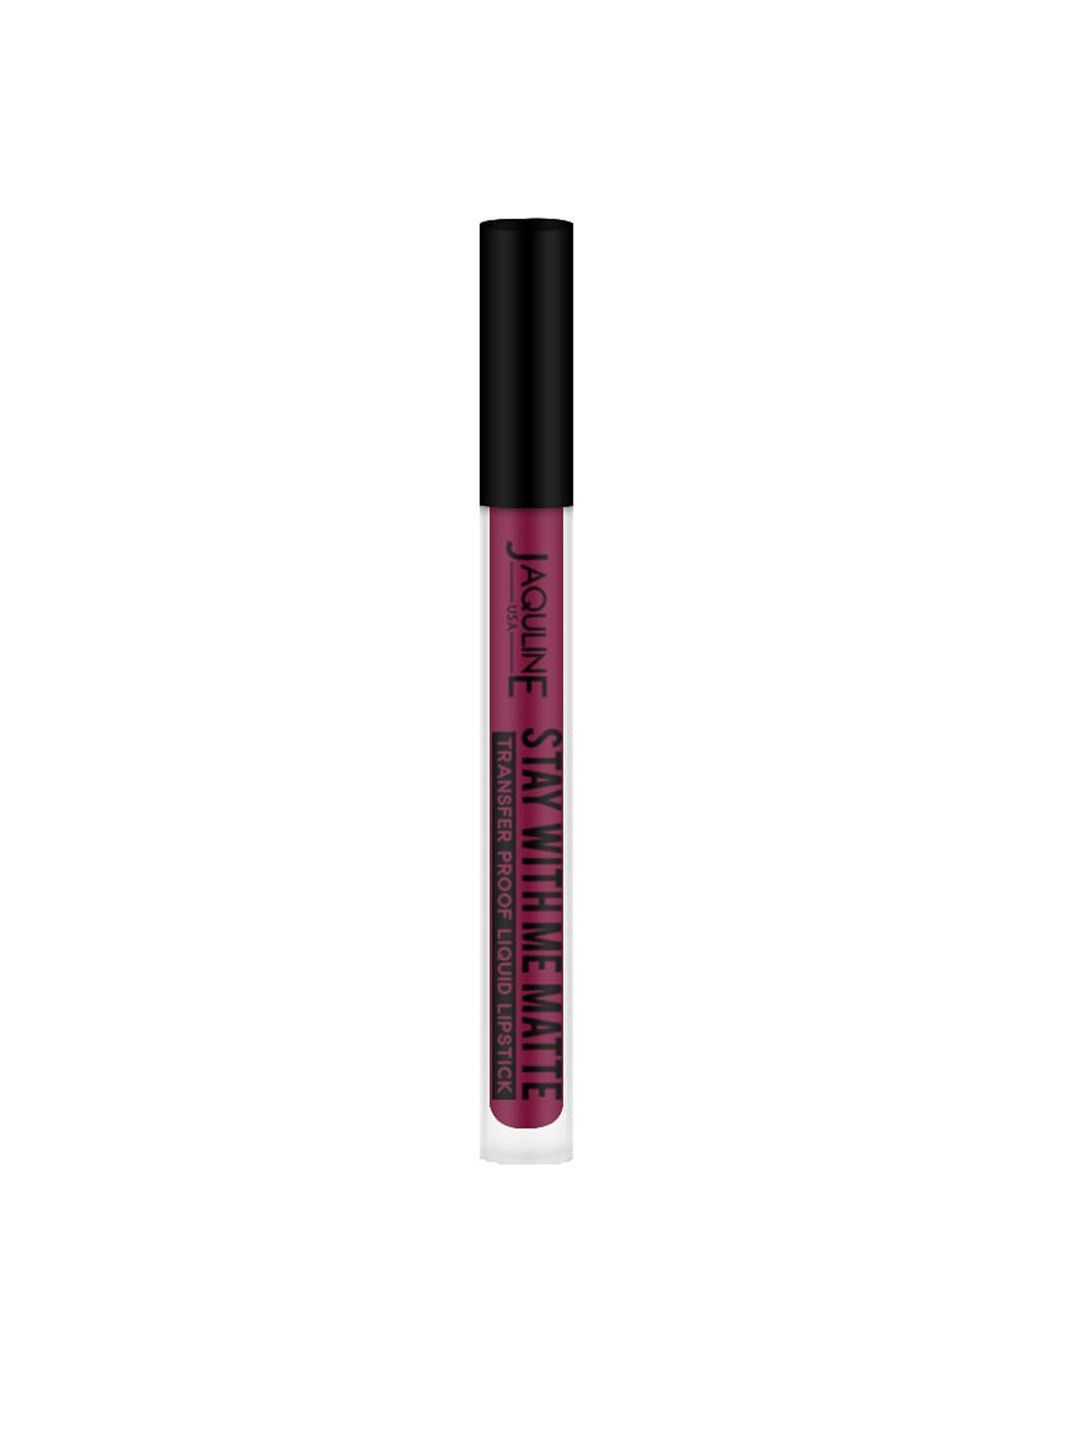 Jaquline USA Stay With Me Liquid Lipstick - Boss Babe 3ml Price in India